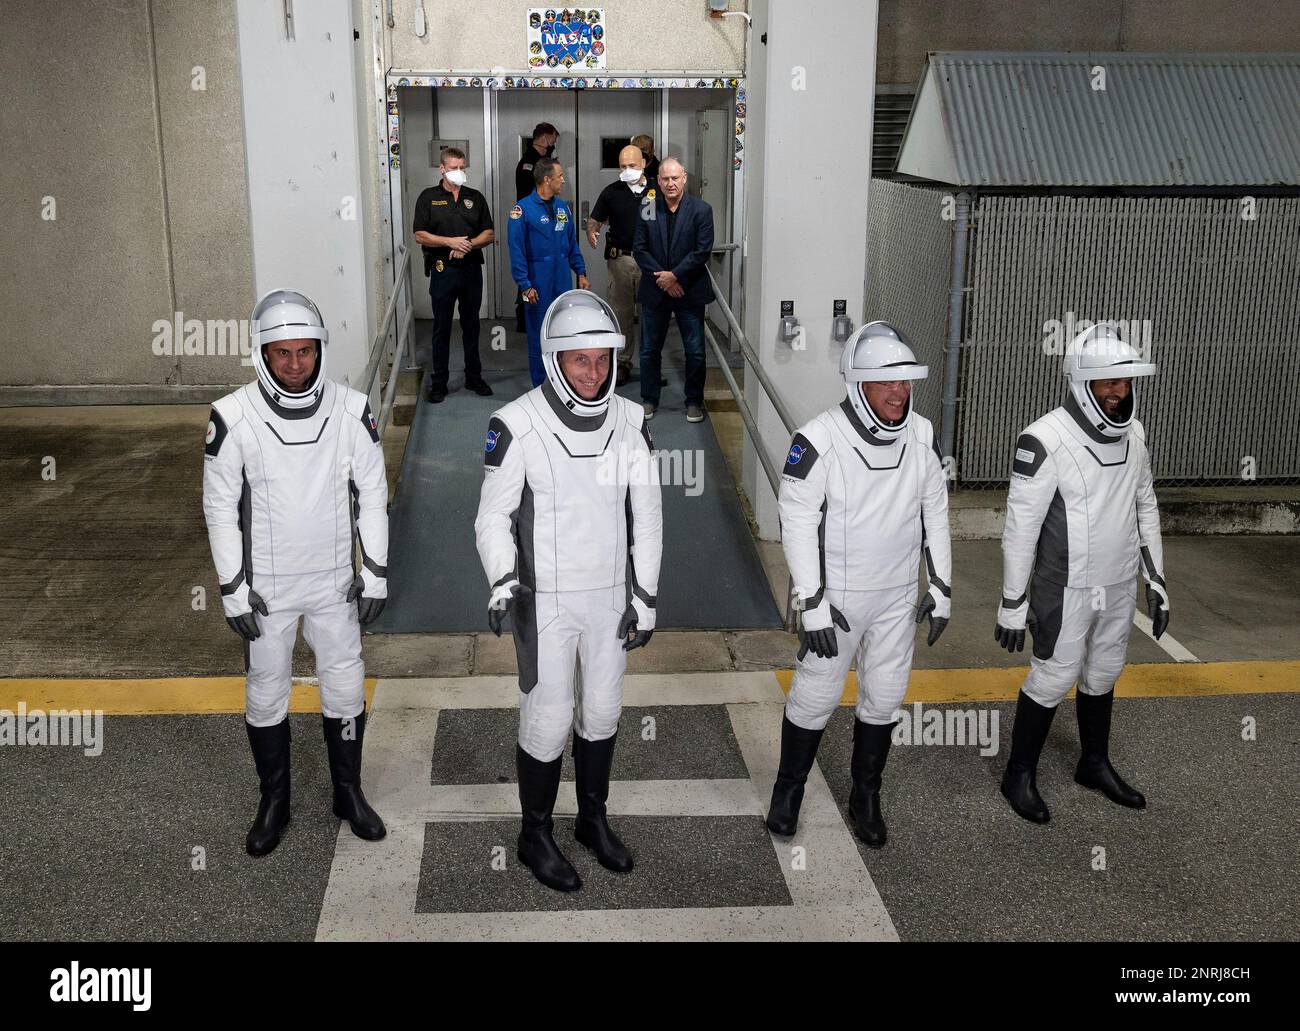 Cape Canaveral, United States of America. 23 February, 2023. Astronauts from left; Andrey Fedyaev of Roscosmos, Woody Hoburg, and Stephen Bowen, of NASA, and Sultan Alneyadi of the United Arab Emirates depart the Neil  Armstrong Operations and Checkout Building to board the SpaceX Dragon spacecraft for launch at the Kennedy Space Center, February 26, 2023 in Cape Canaveral, Florida. The NASA SpaceX Crew-6 mission to the International Space Station was scrubbed after a problem with the TEA-TEB ground system was detected delaying launch until March 2nd.  Credit: Joel Kowsky/NASA/Alamy Live News Stock Photo